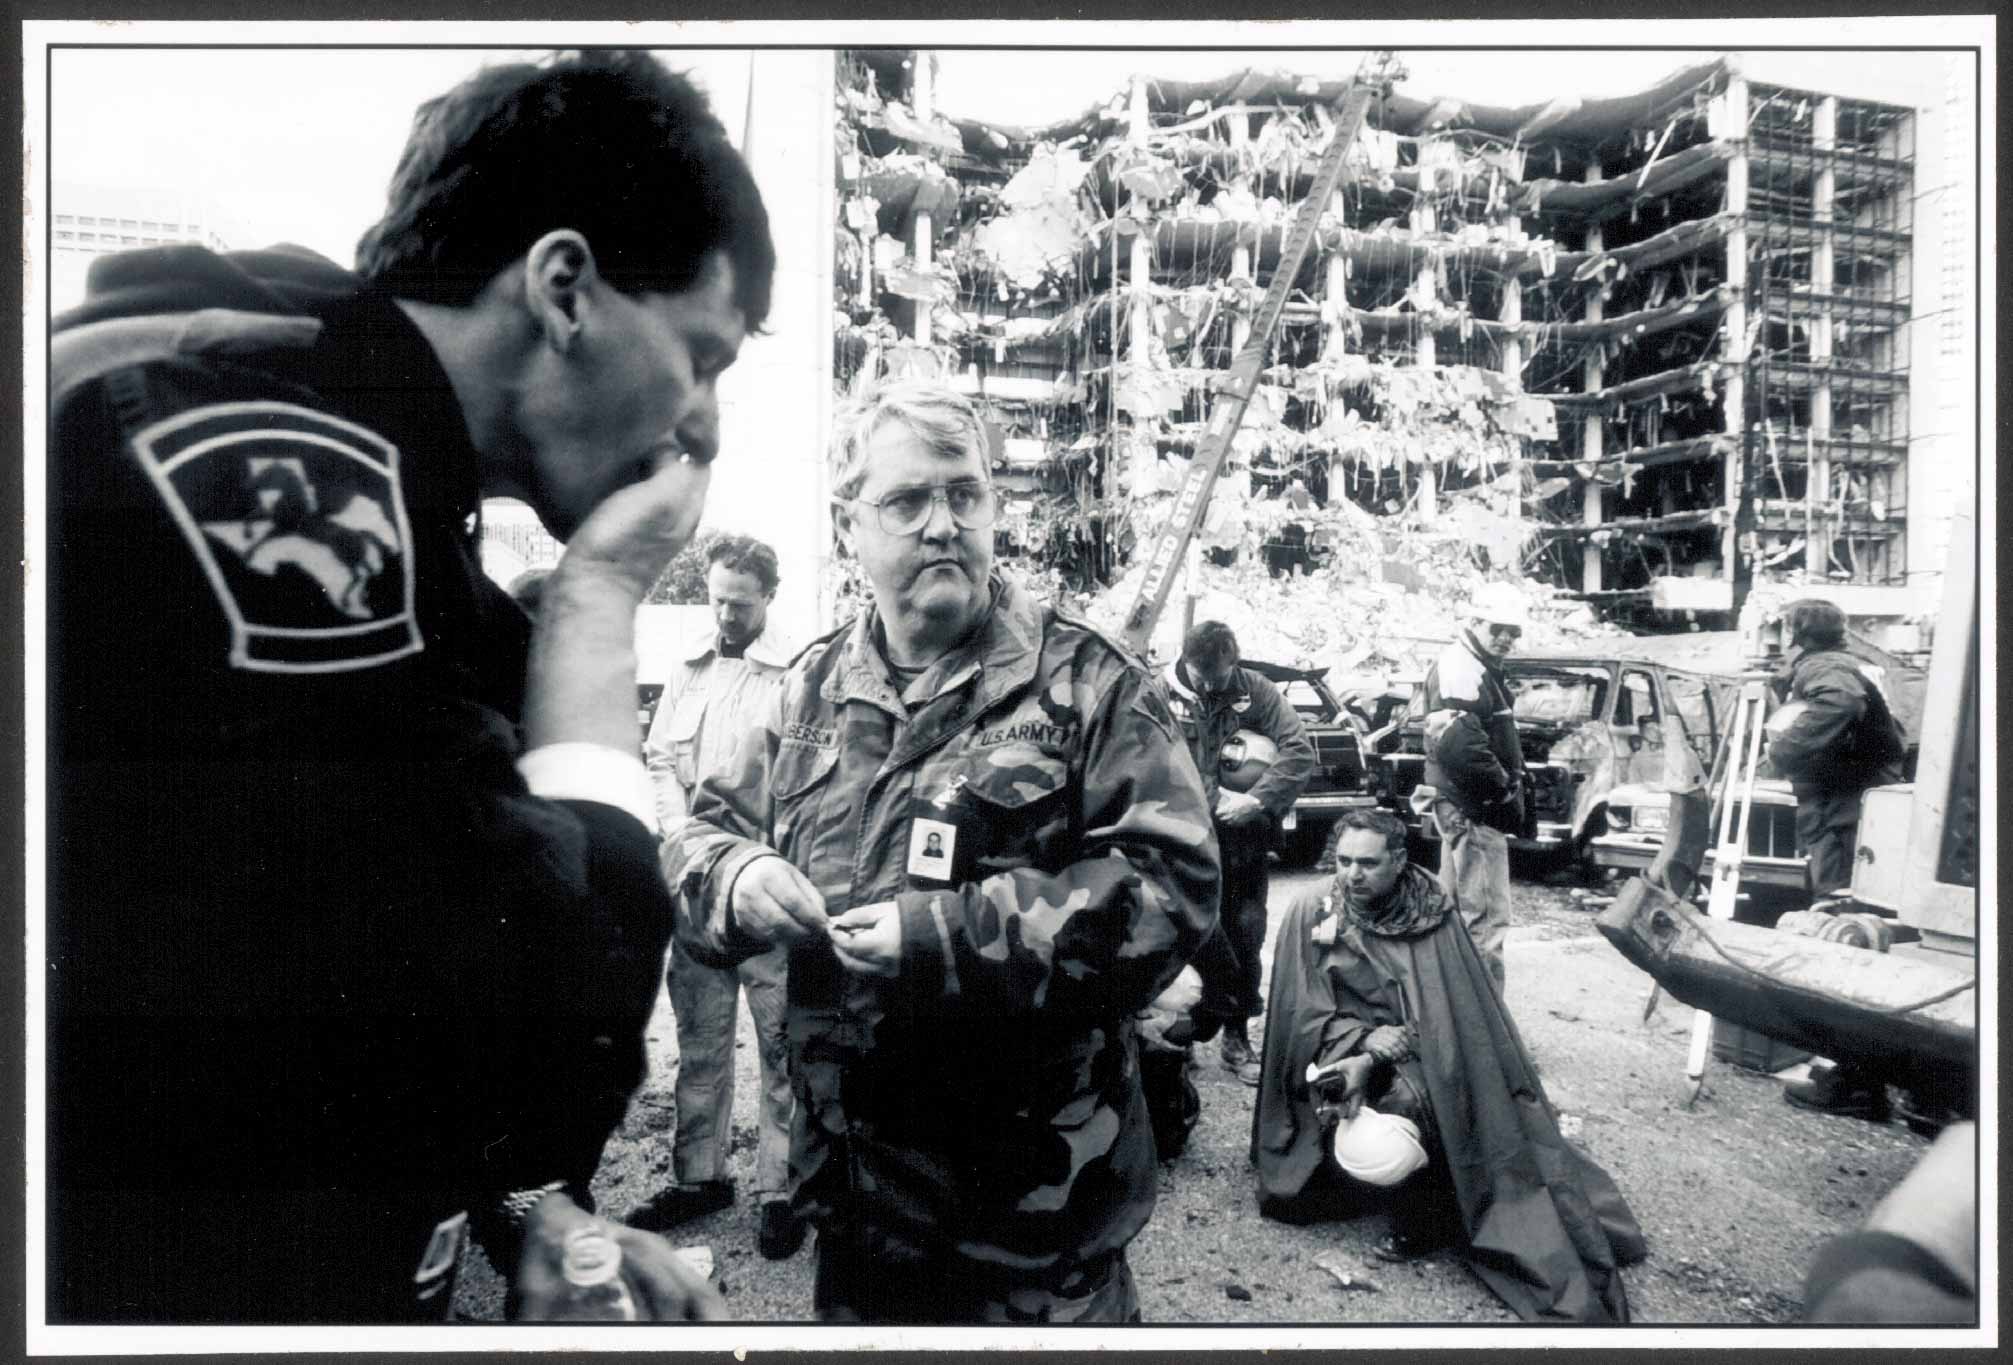 Serving communion at site of Oklahoma City bombing